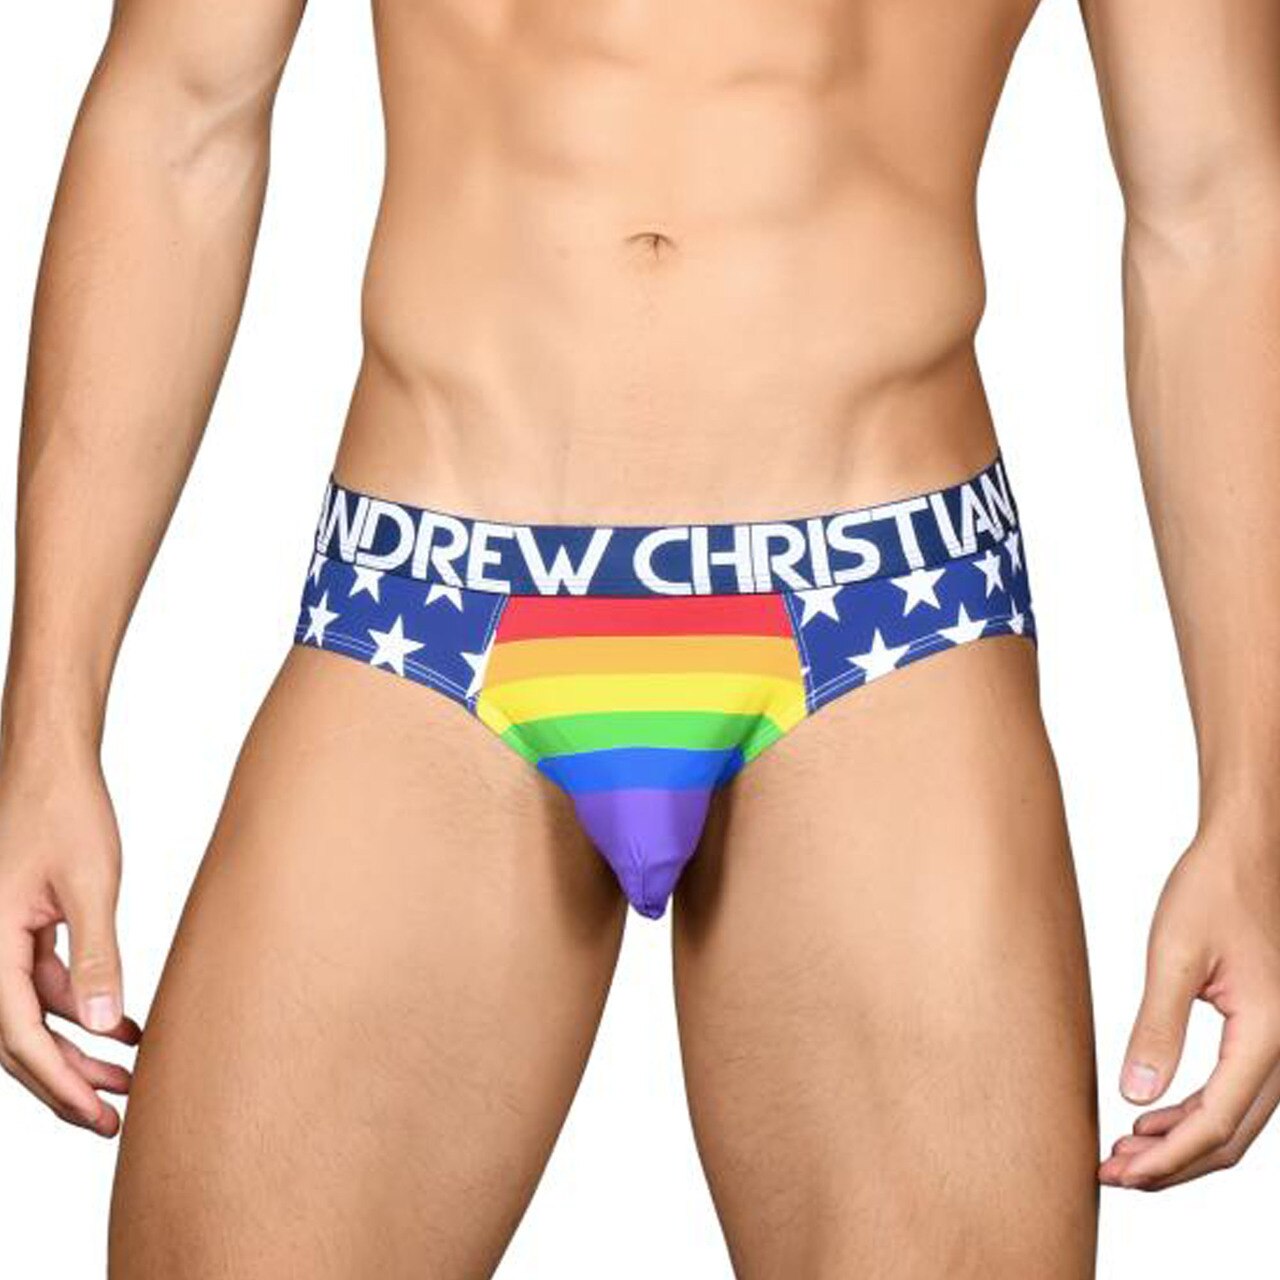 Mens Andrew Christian Star Pride Brief w/ Almost Naked